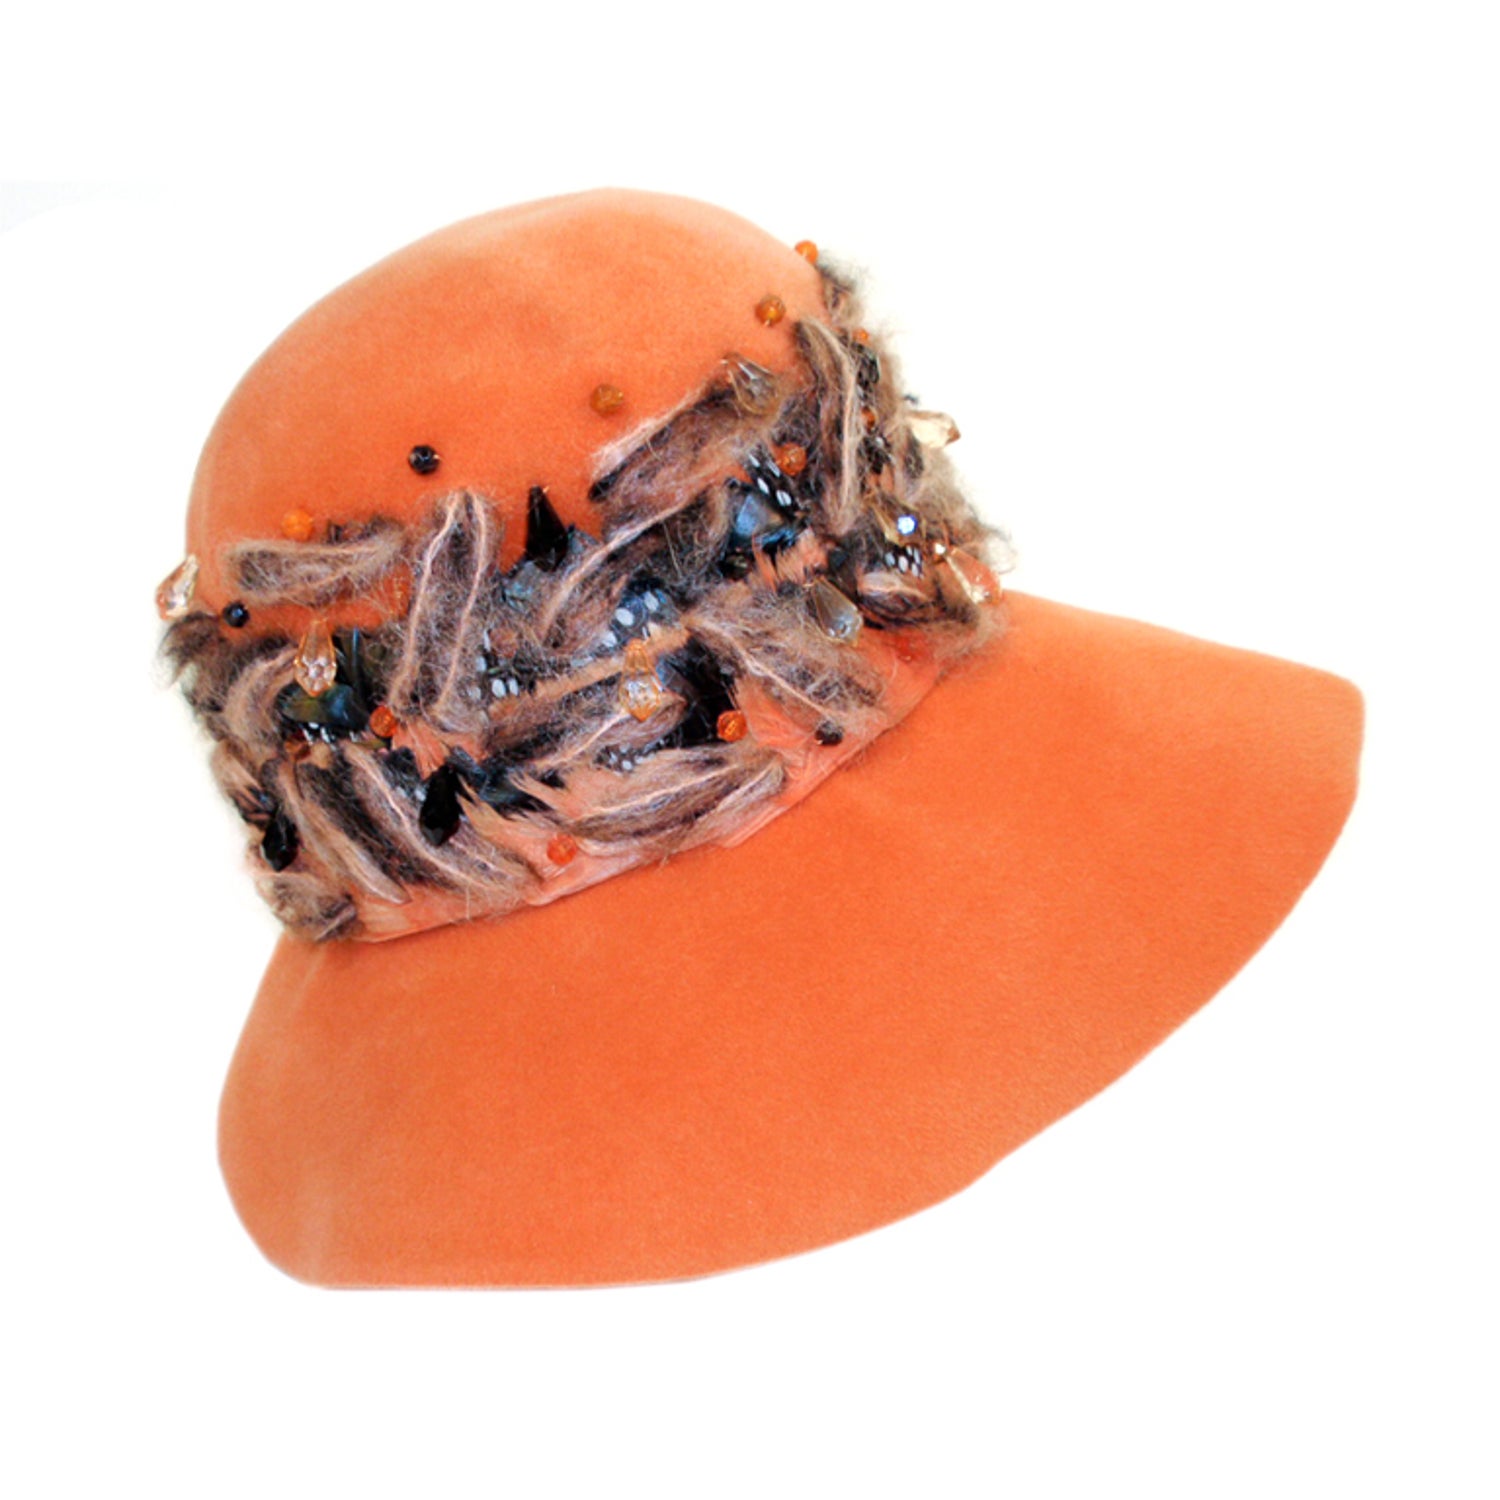 Christian Dior Chapeaux Orange Floppy Hat w/ Feathers, Yarn, and Beads For  Sale at 1stDibs | christian dior chapeaux hat, orange dior hat